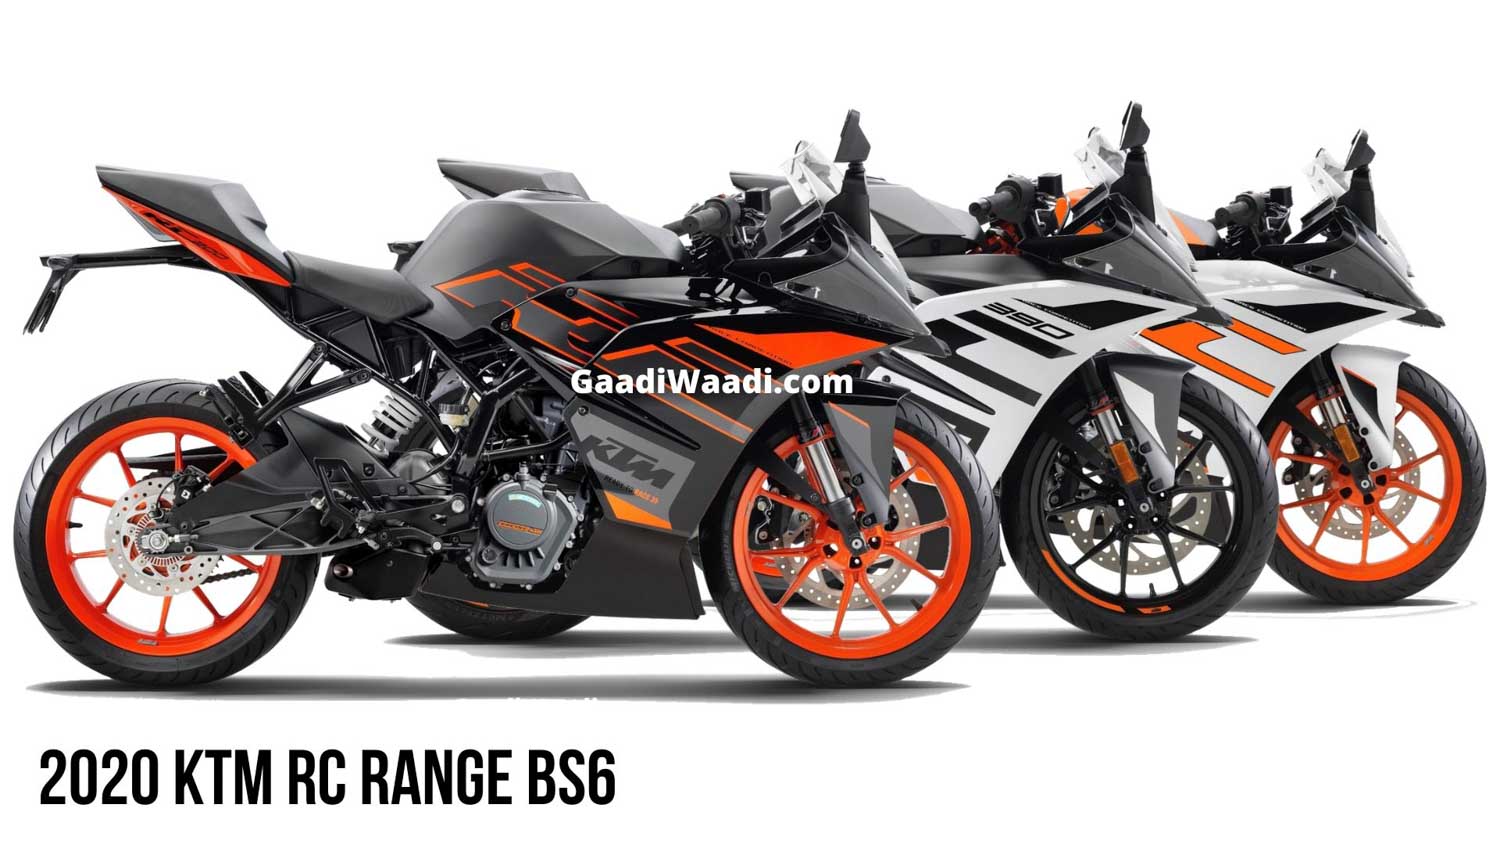 Over 6000 Ktm Bikes Sold In February 2020 In India